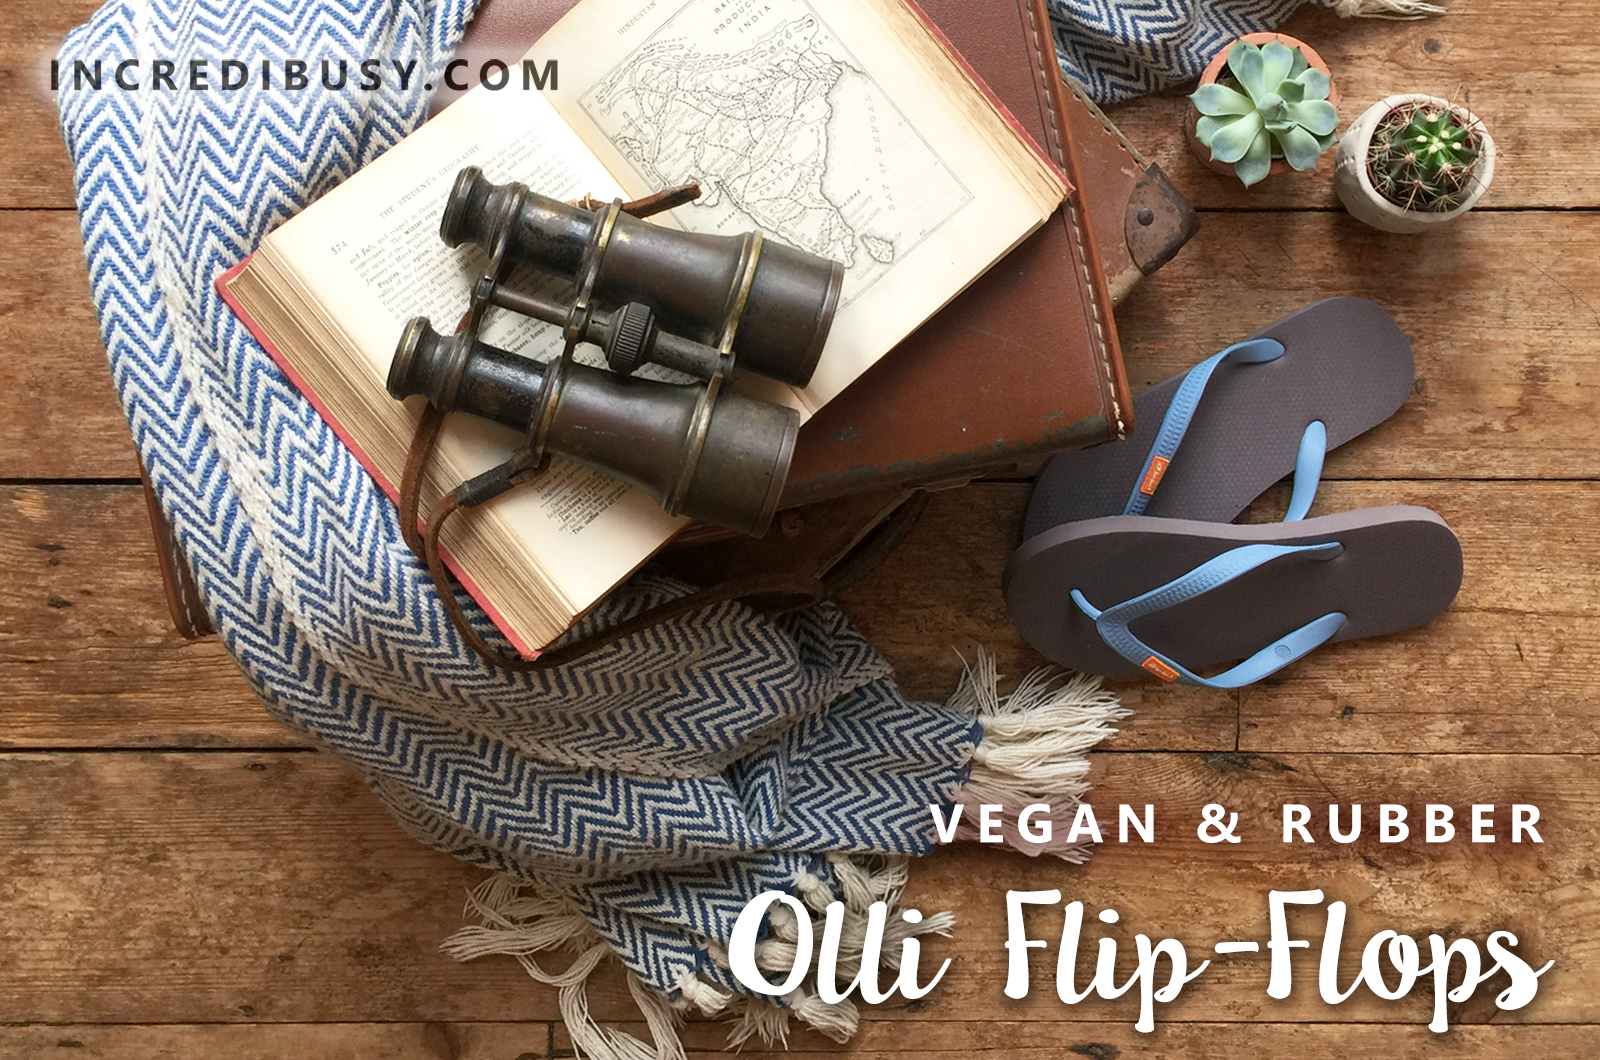 Olli-Flip-Flop-Incredibusy-FEATURED-IMAGE-SIZE